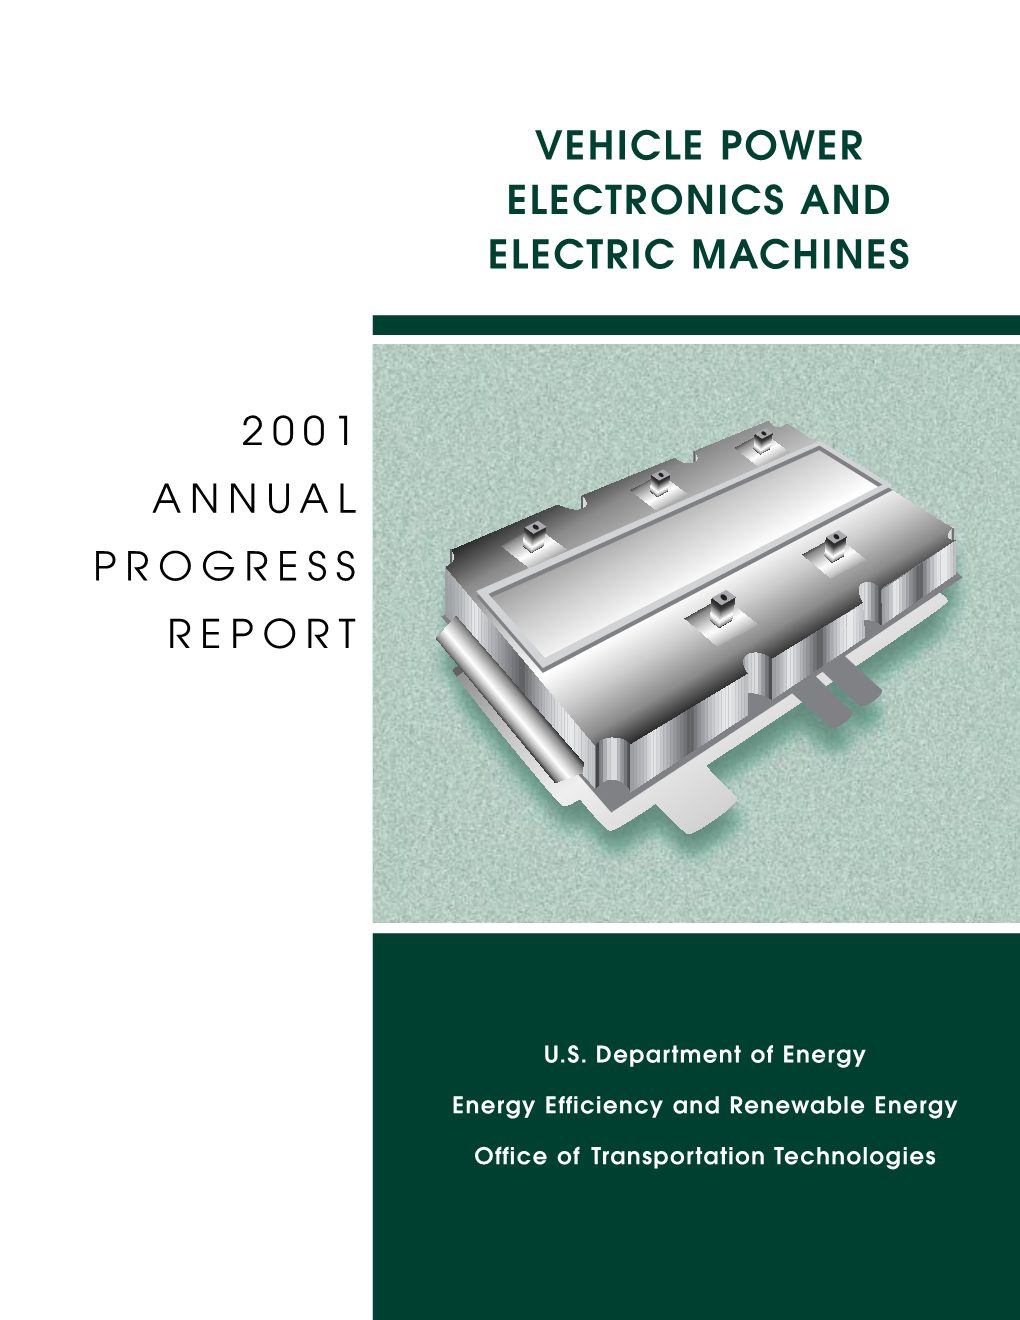 FY2001 Progress Report for the Vehicle Power Electronics And